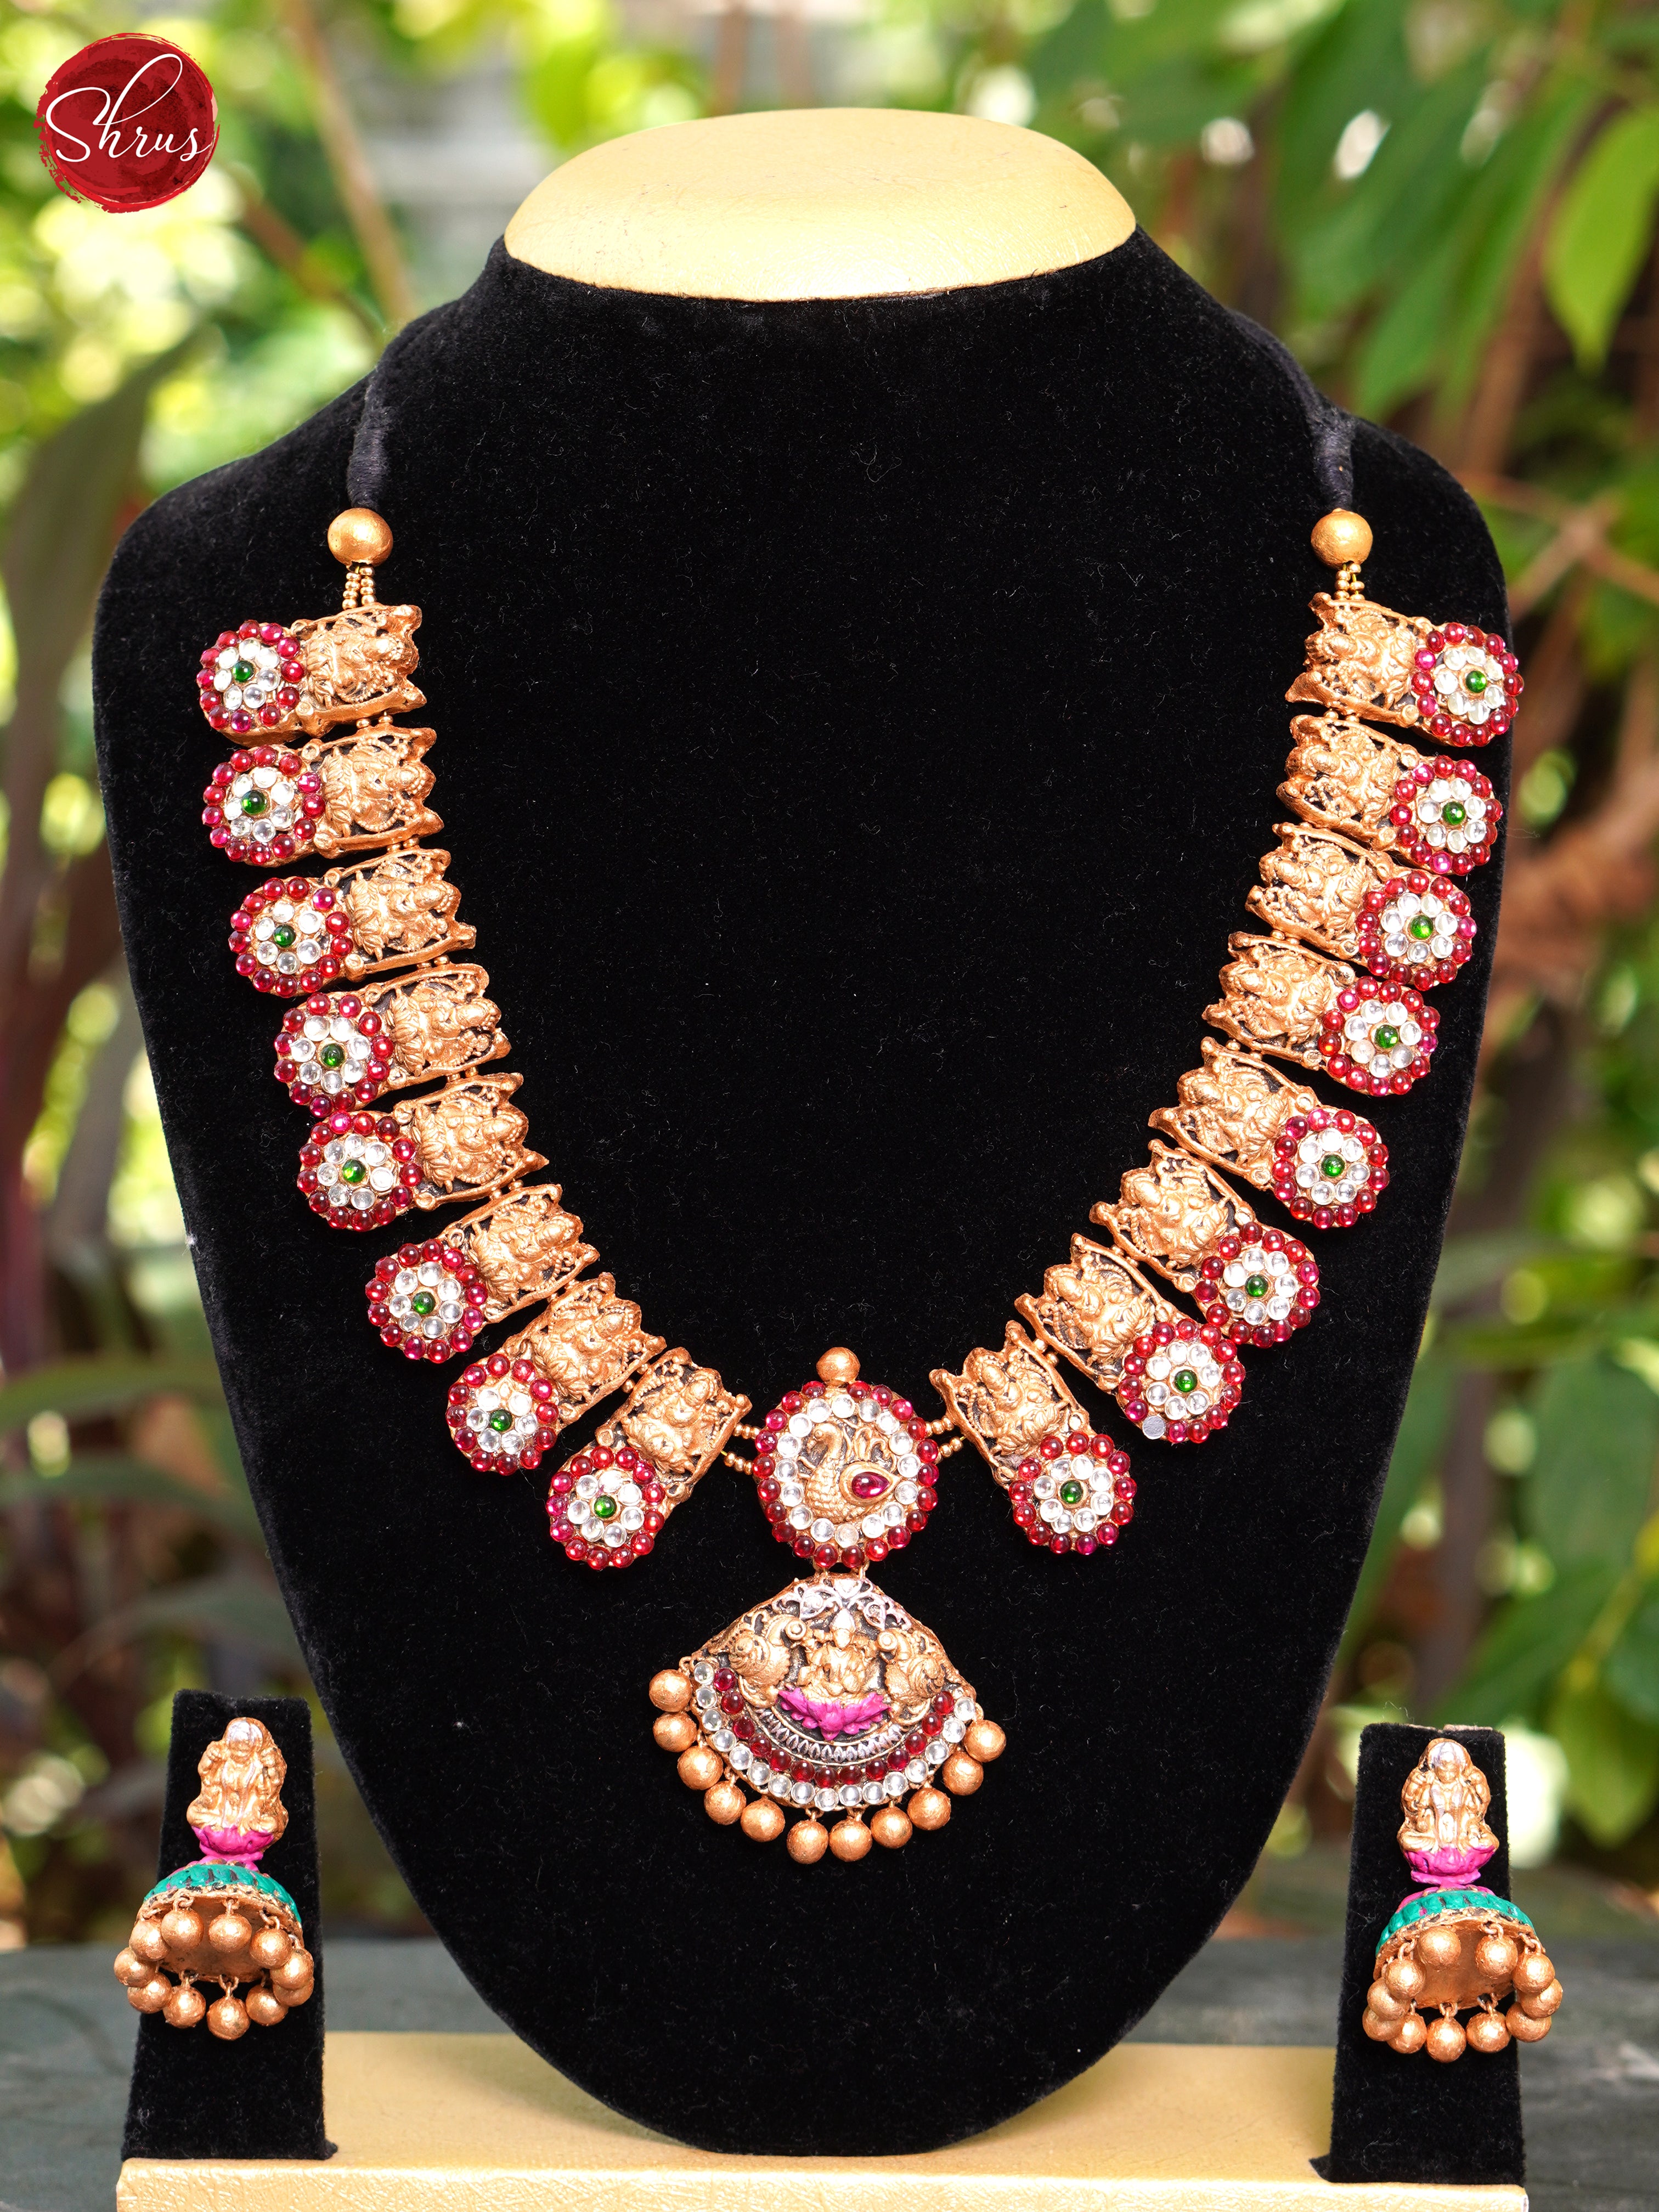 Handcrafted Lakshmi terracotta Necklace  with Jhumkas - Accessories - Shop on ShrusEternity.com